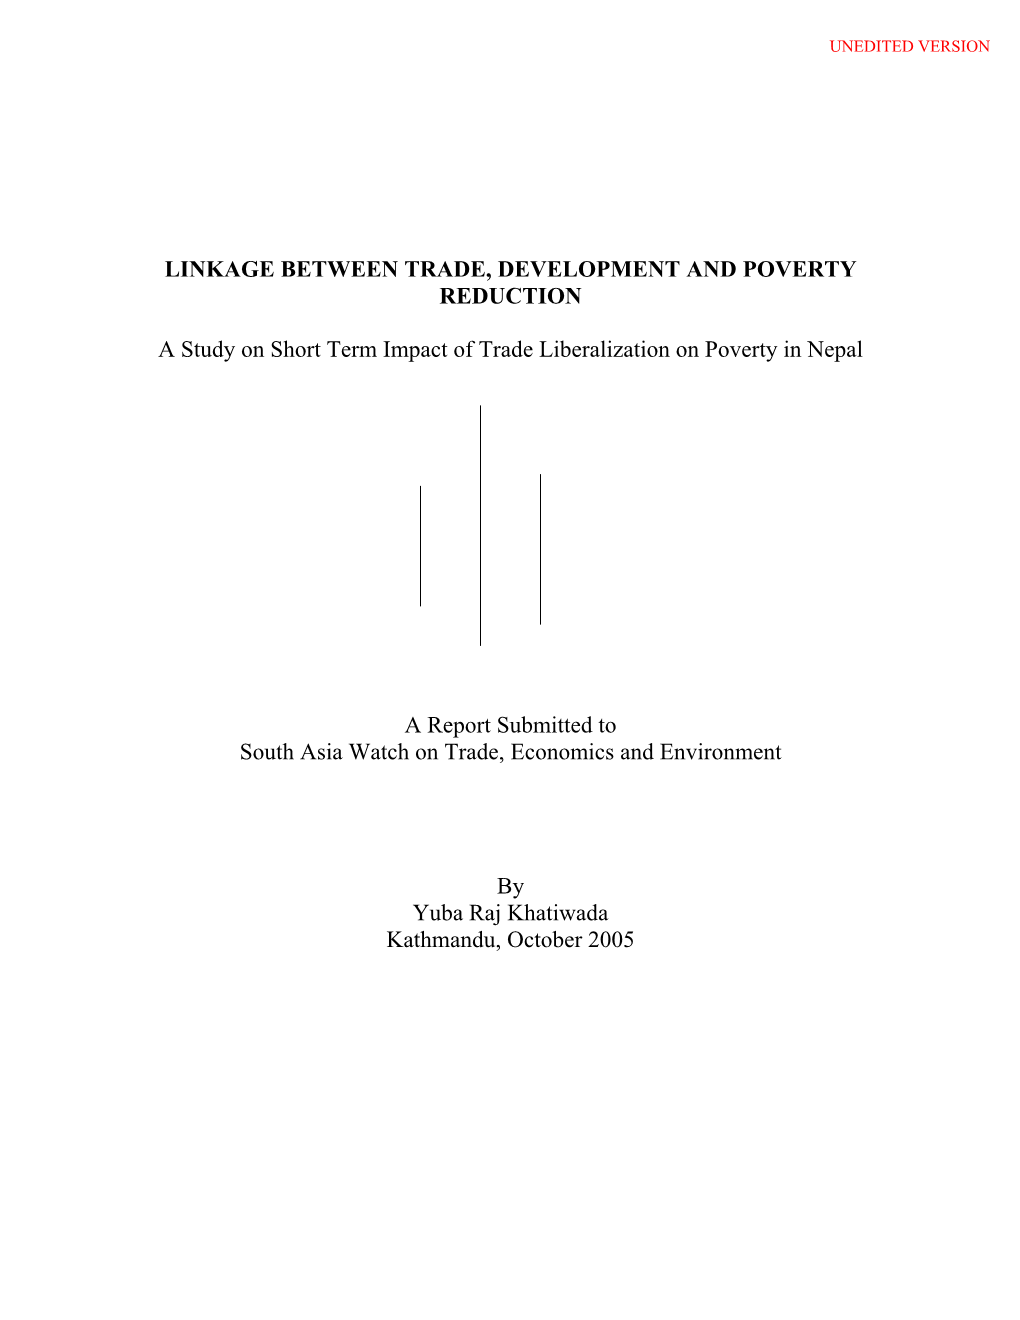 Linkage Between Trade, Development and Poverty Reduction